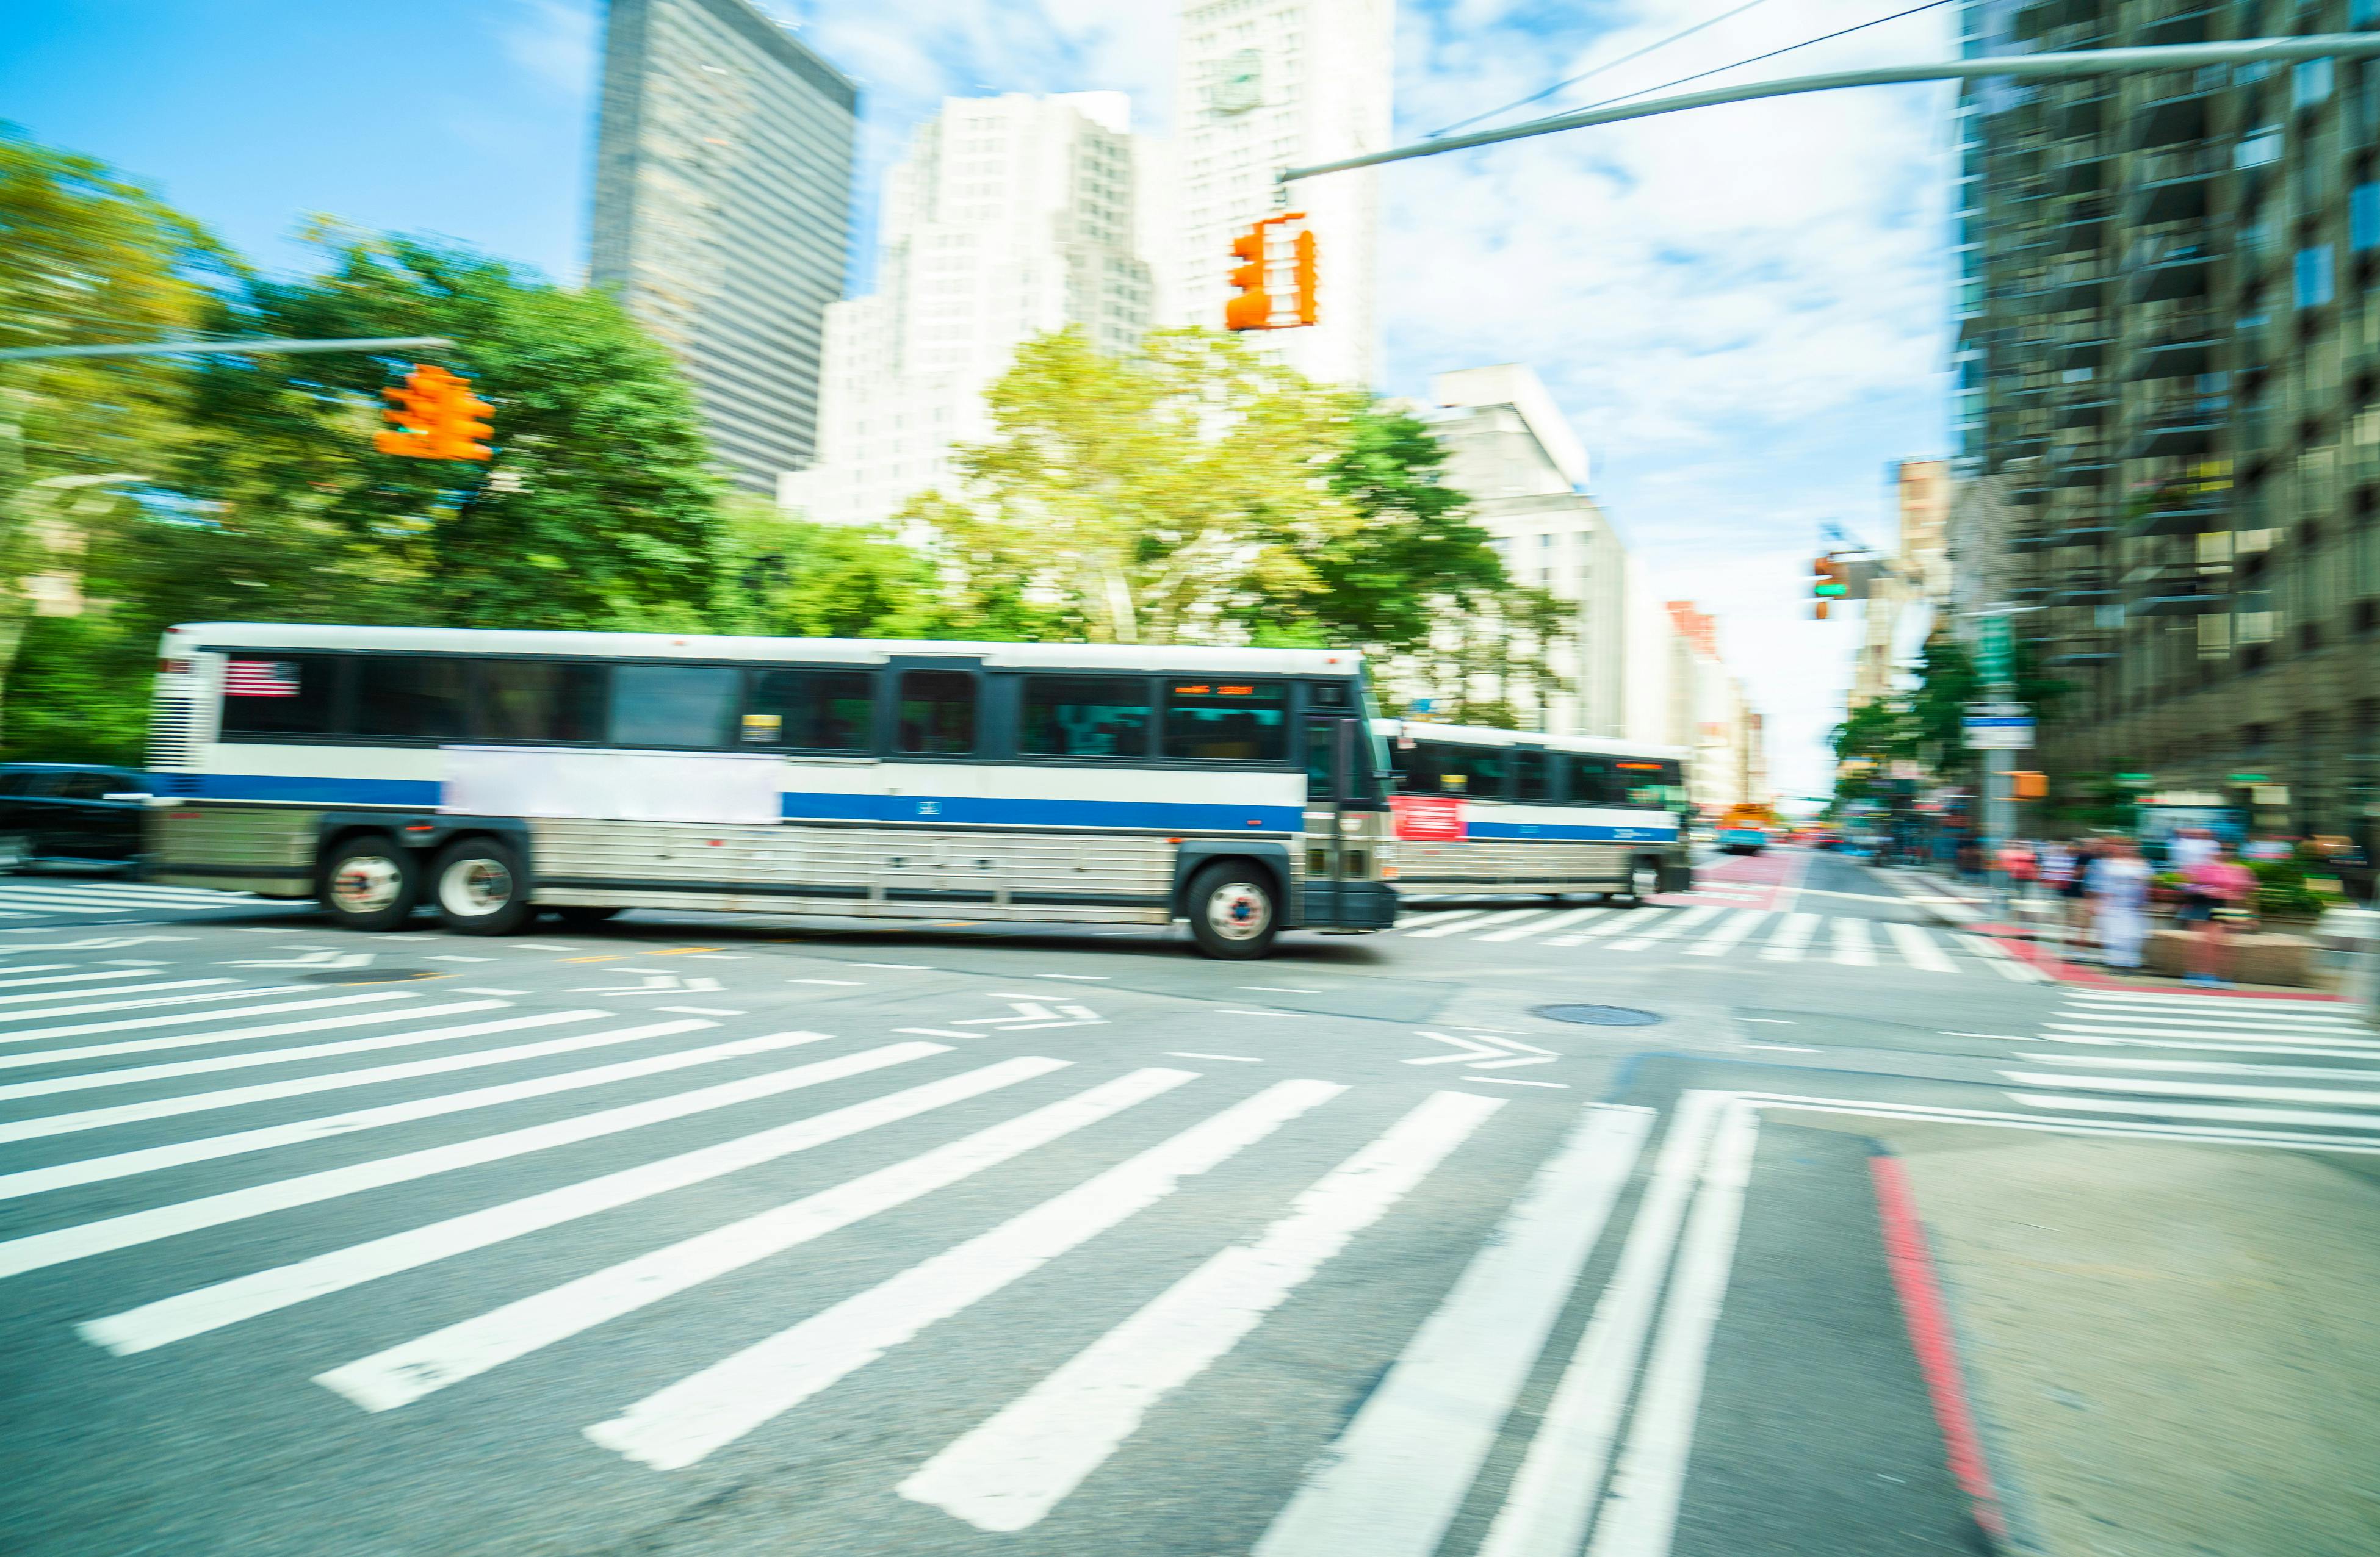 City bus driving through new york intersection